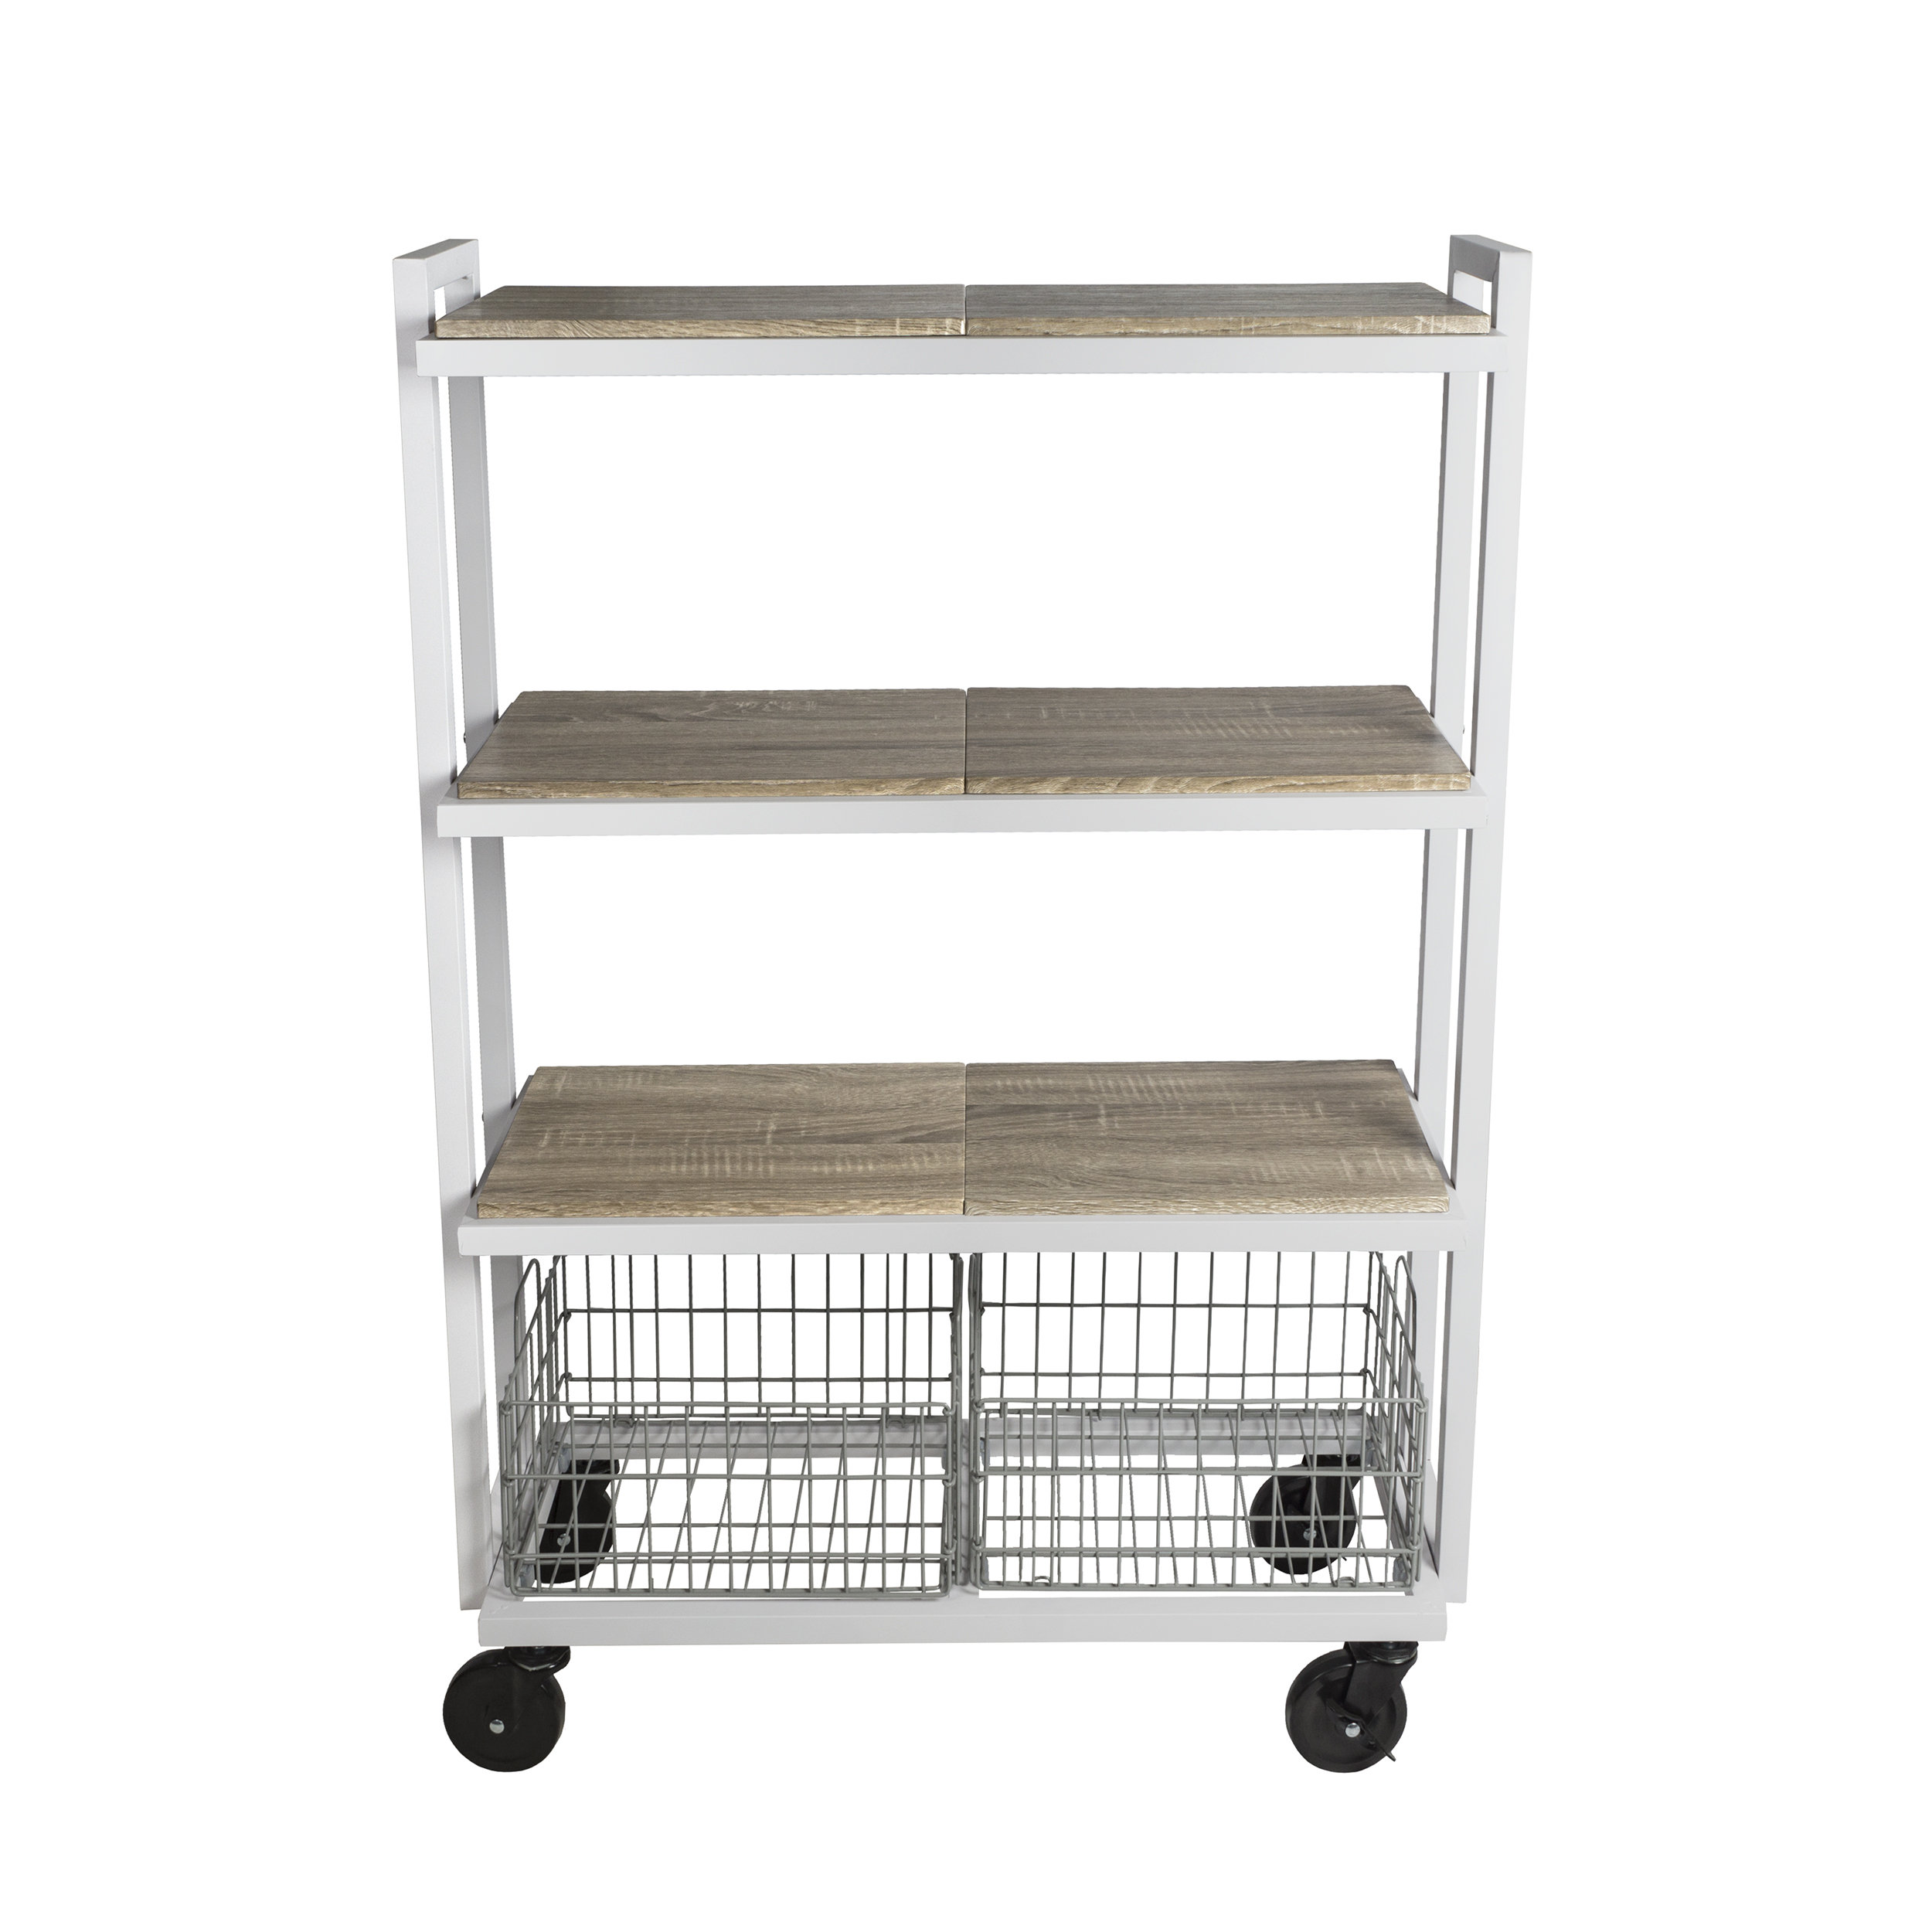 Urbspace Transformable 4 Tier Mobile Utility Cart Reviews Wayfair